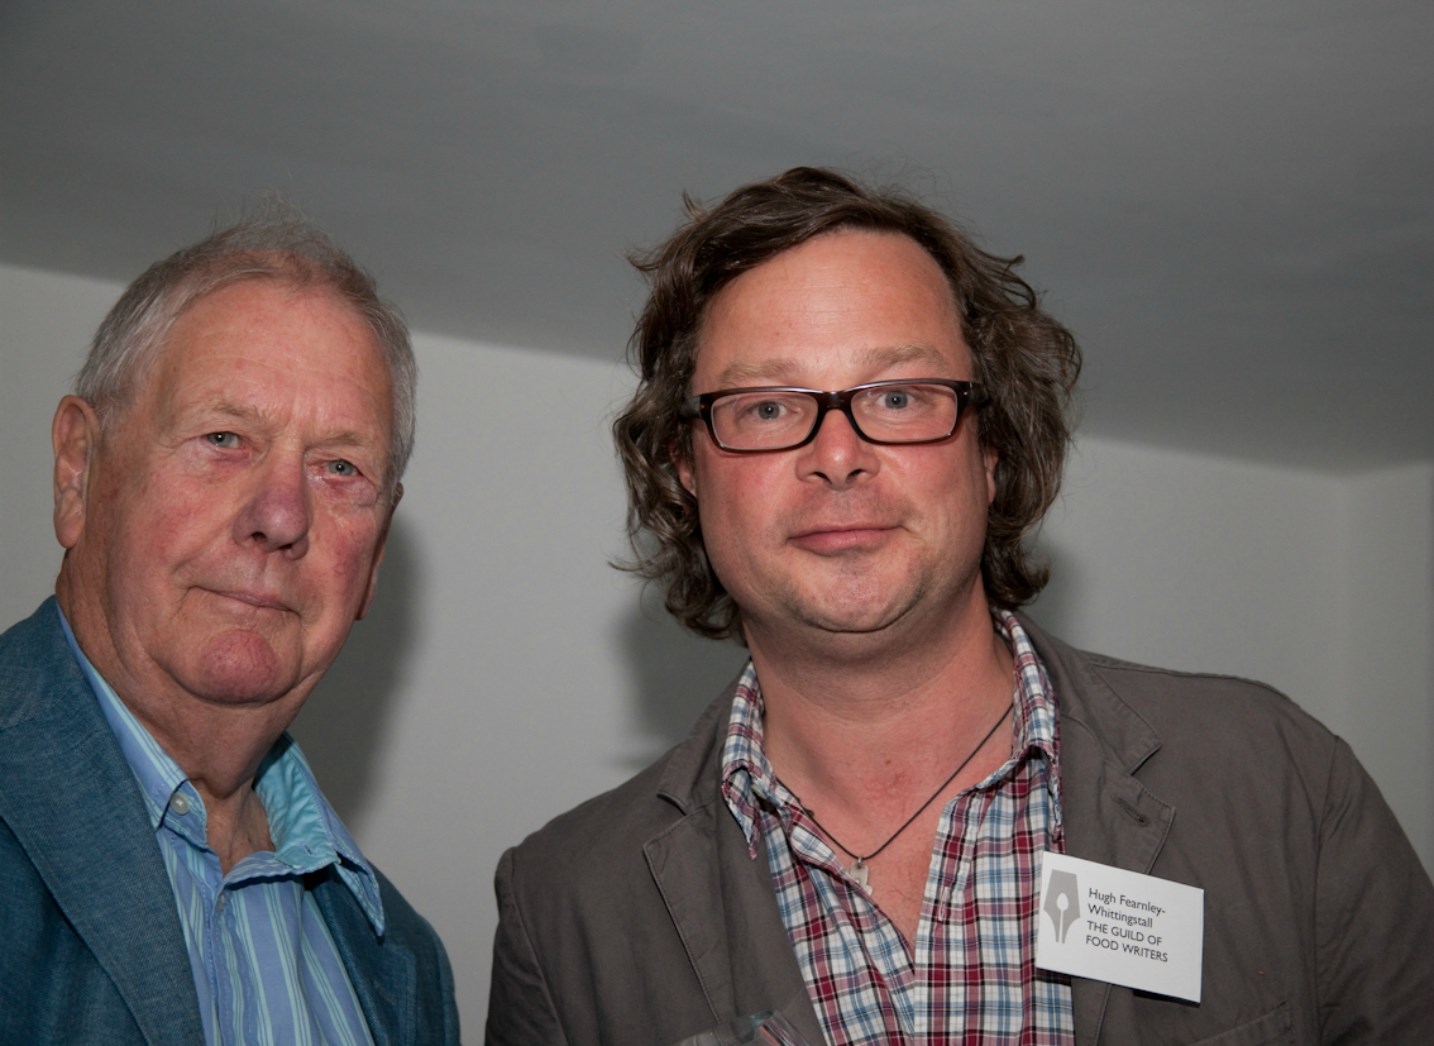 Guild members Colin Spencer (left) and Hugh Fearnley-Whittingstall